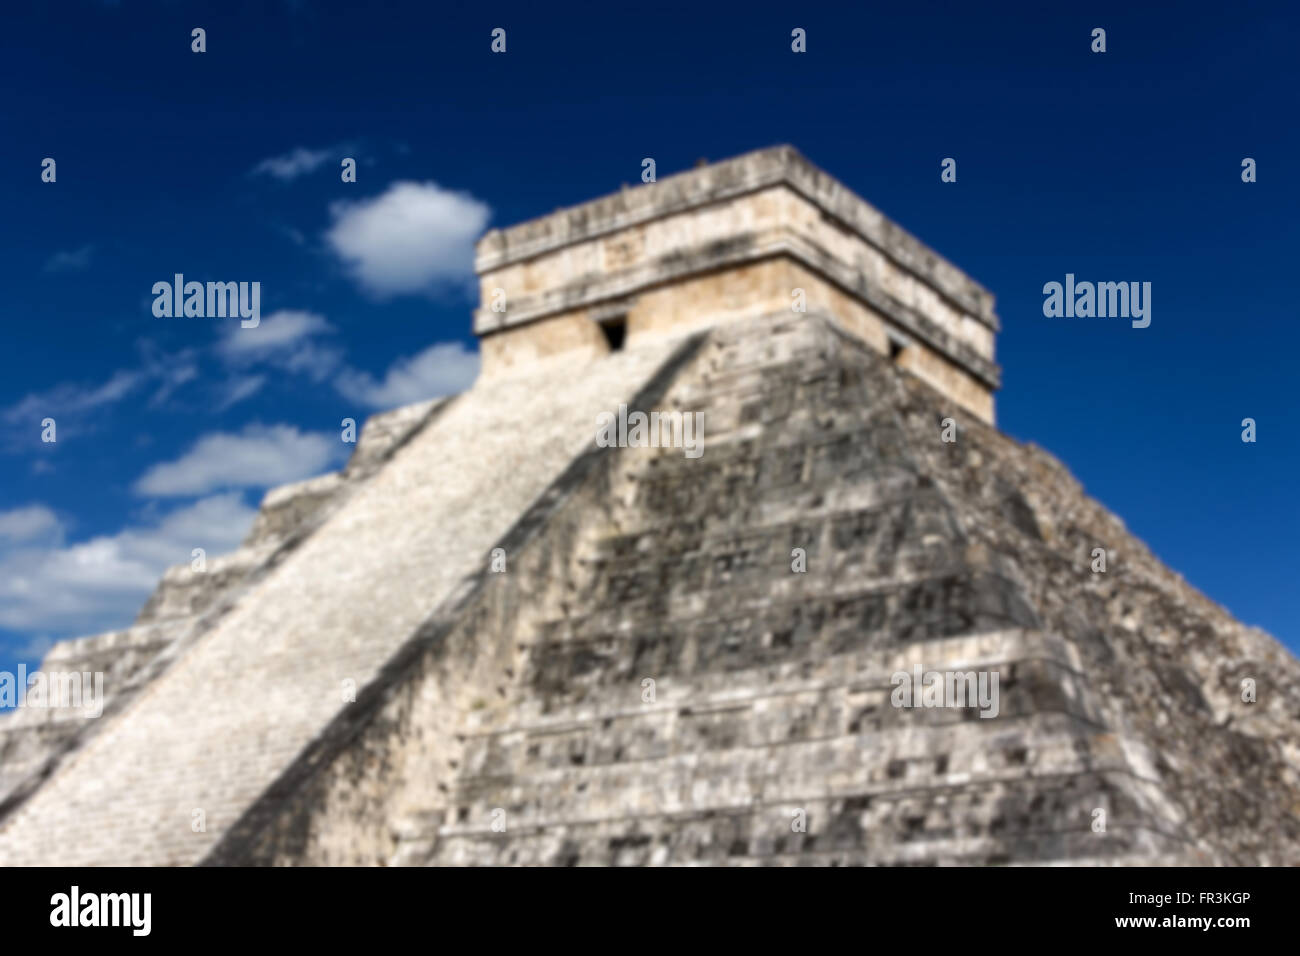 Blurred background of Mayan Pyramid to Kukulkan, the feathered serpent god, at Chichen Itza, Yucatan, Mexico. Stock Photo